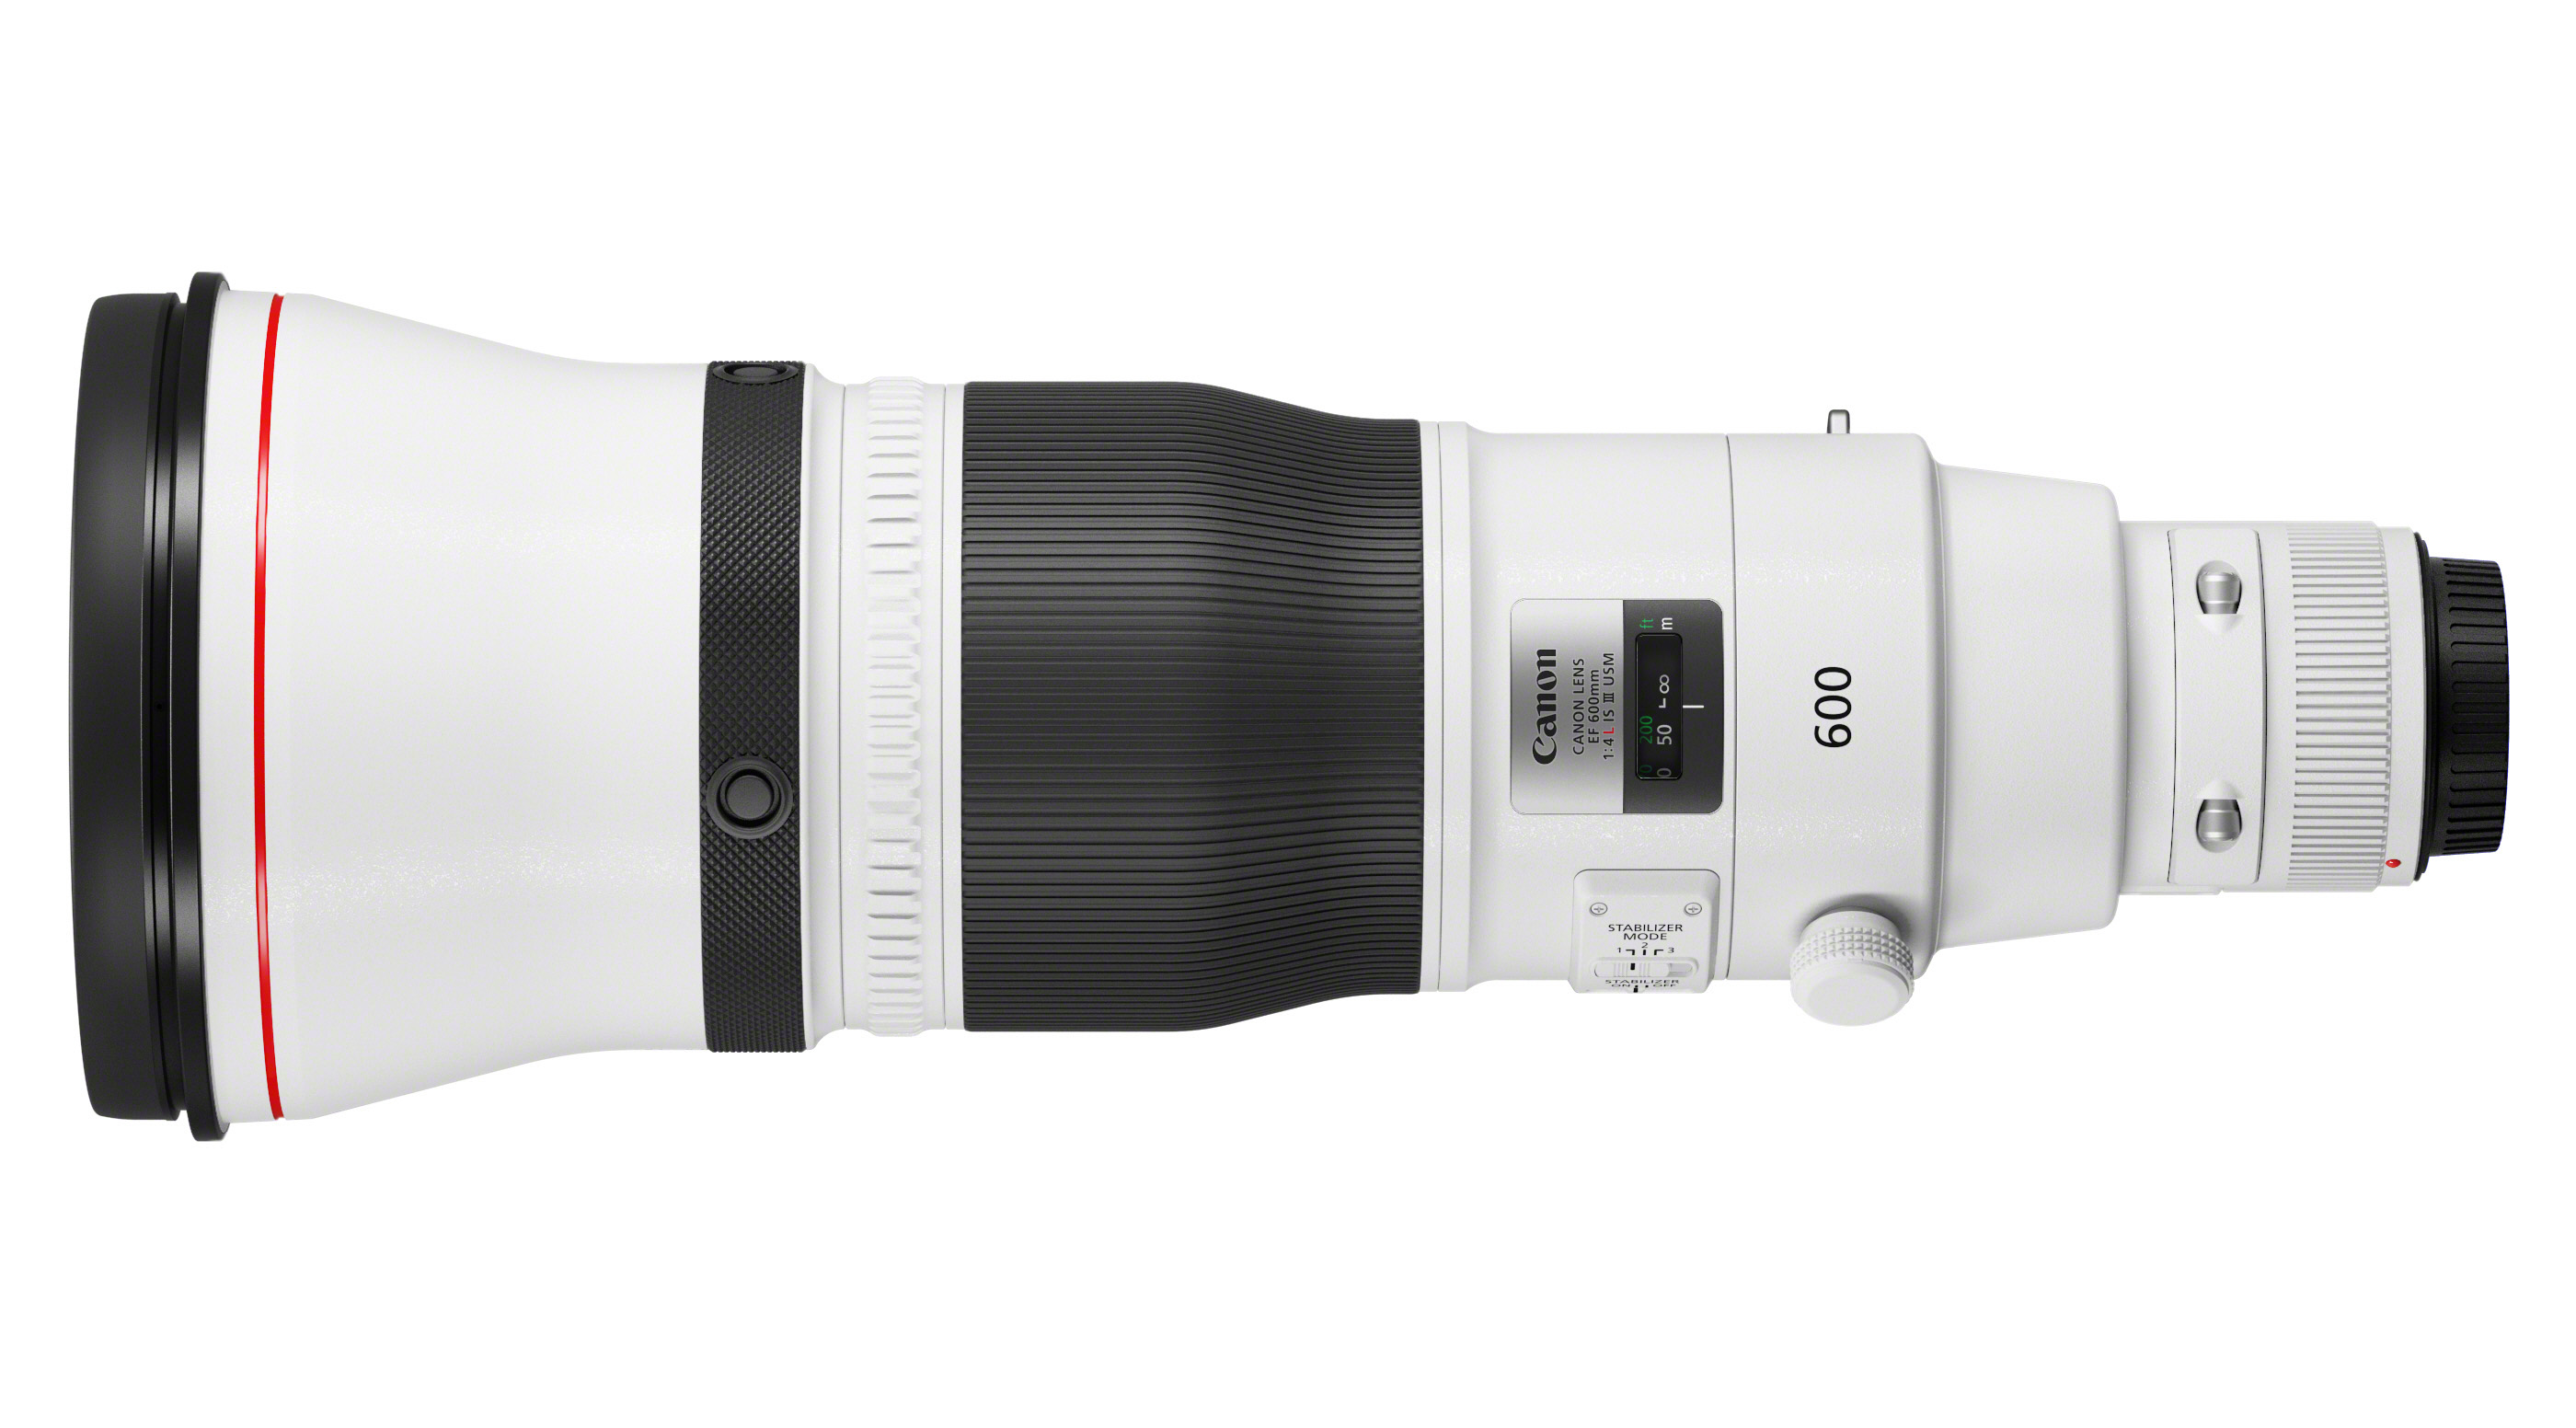 Canon EF 600mm f/4 L IS III USM